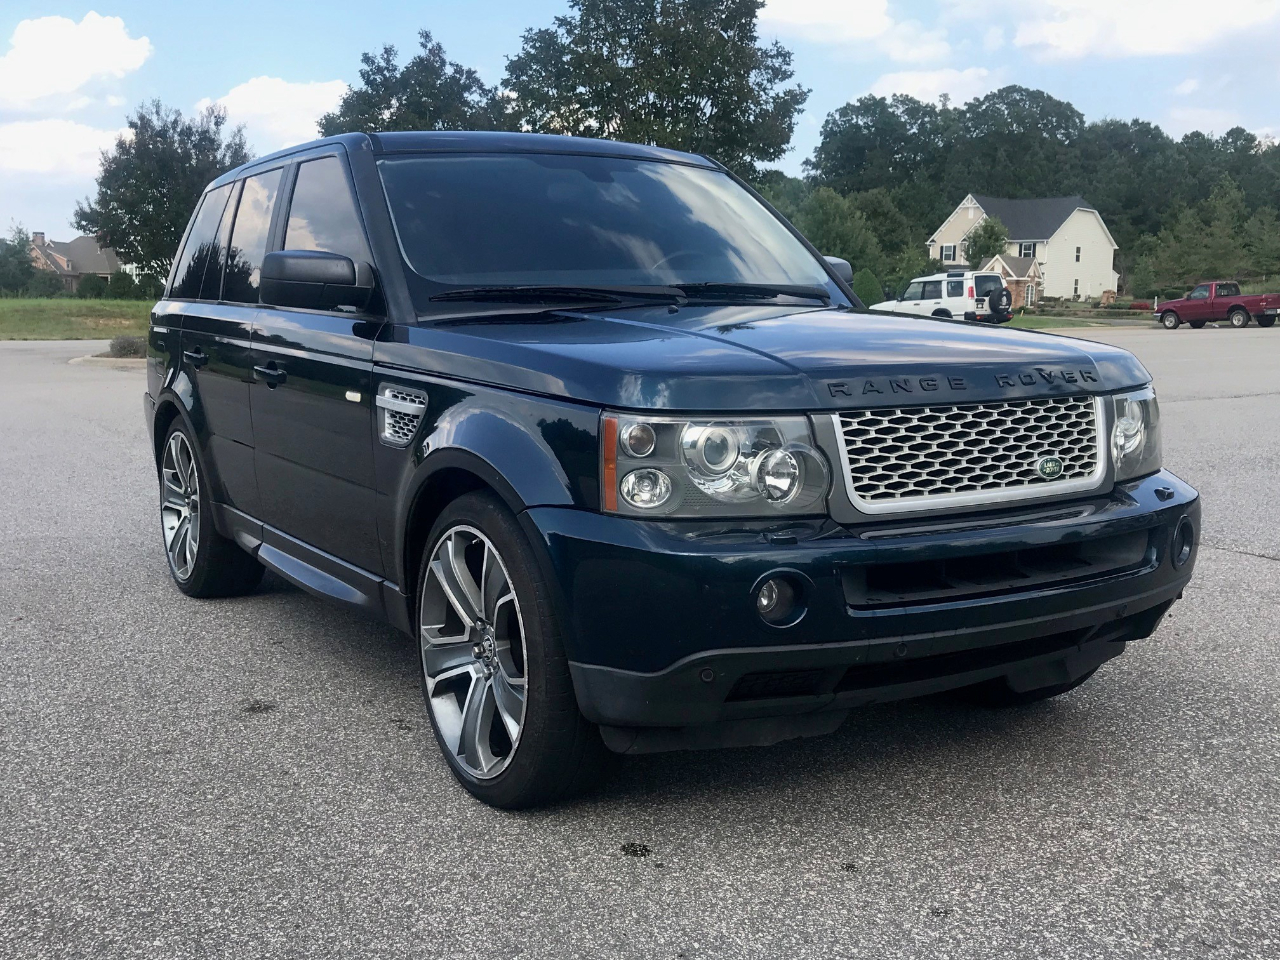 Used 2006 Land Rover Range Rover Sport Hse For Sale In Fort